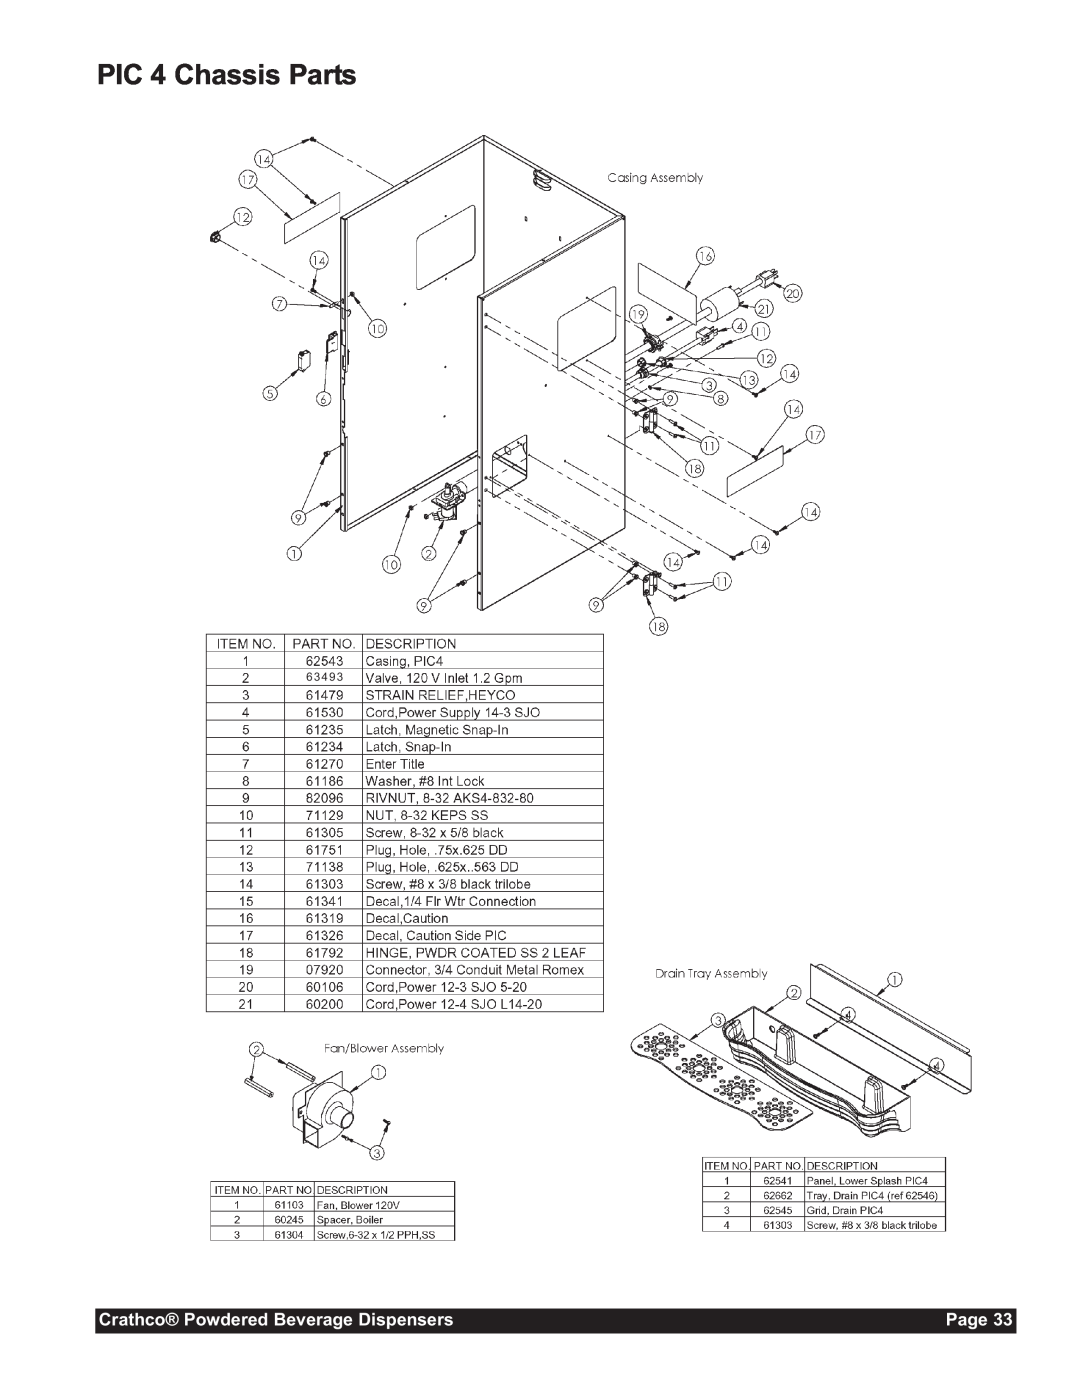 Grindmaster CC-302-20 service manual PIC 4 Chassis Parts, Crathco Powdered Beverage Dispensers, Page, 63493 